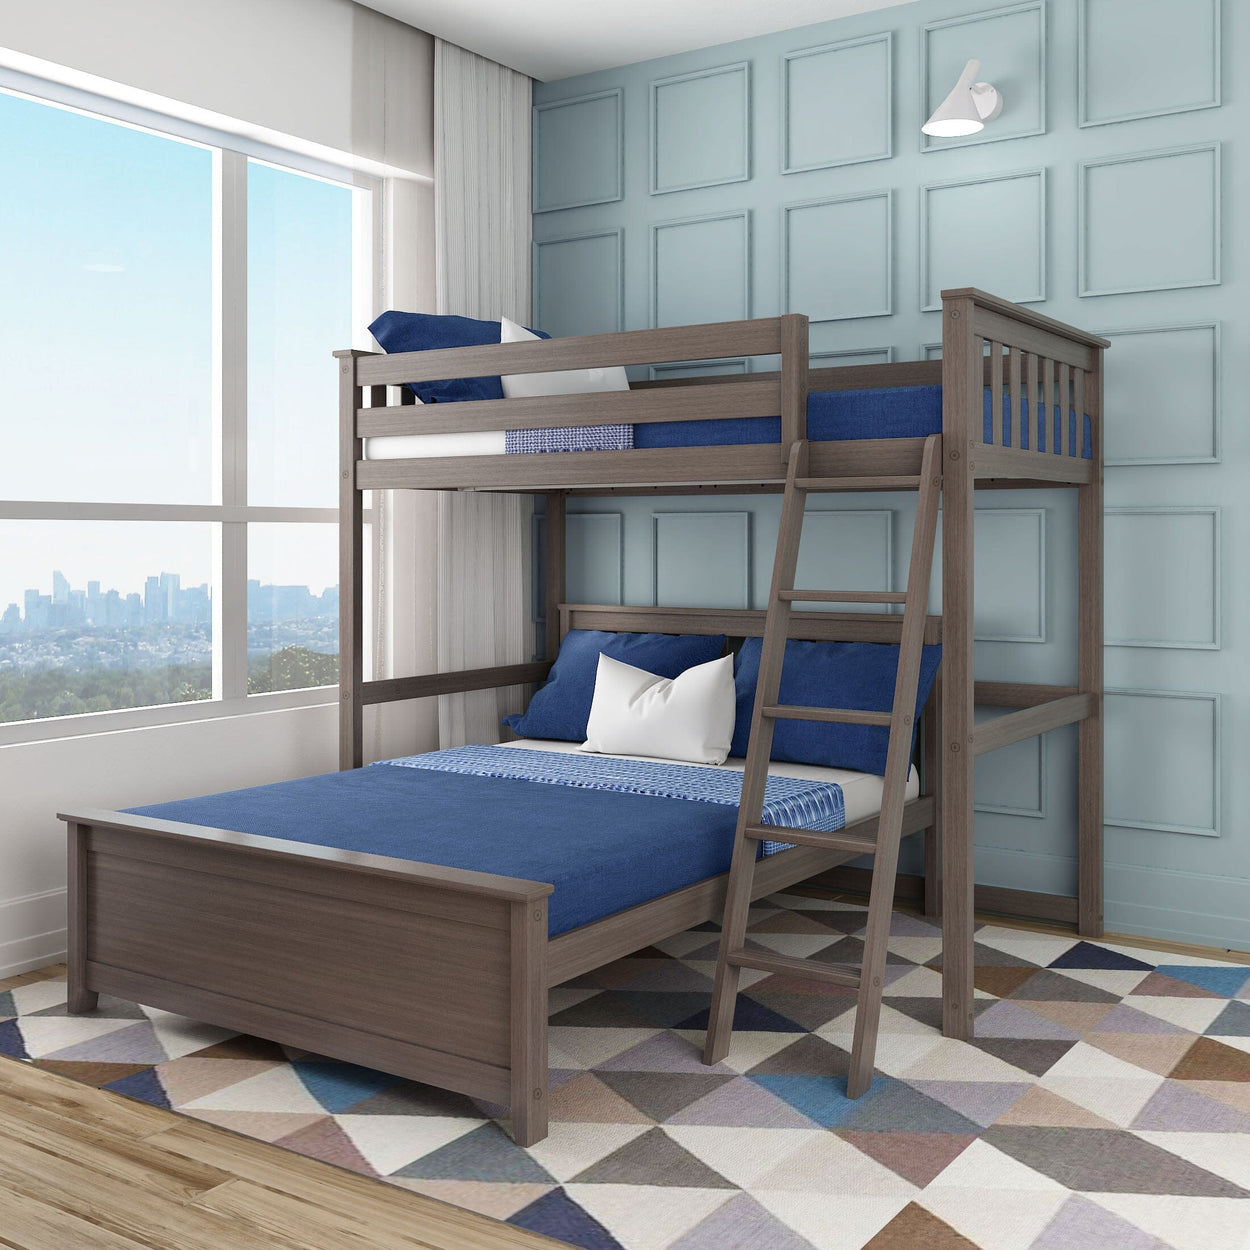 18-812-151 : Bunk Beds L-Shaped Twin over Full Bunk Bed, Clay